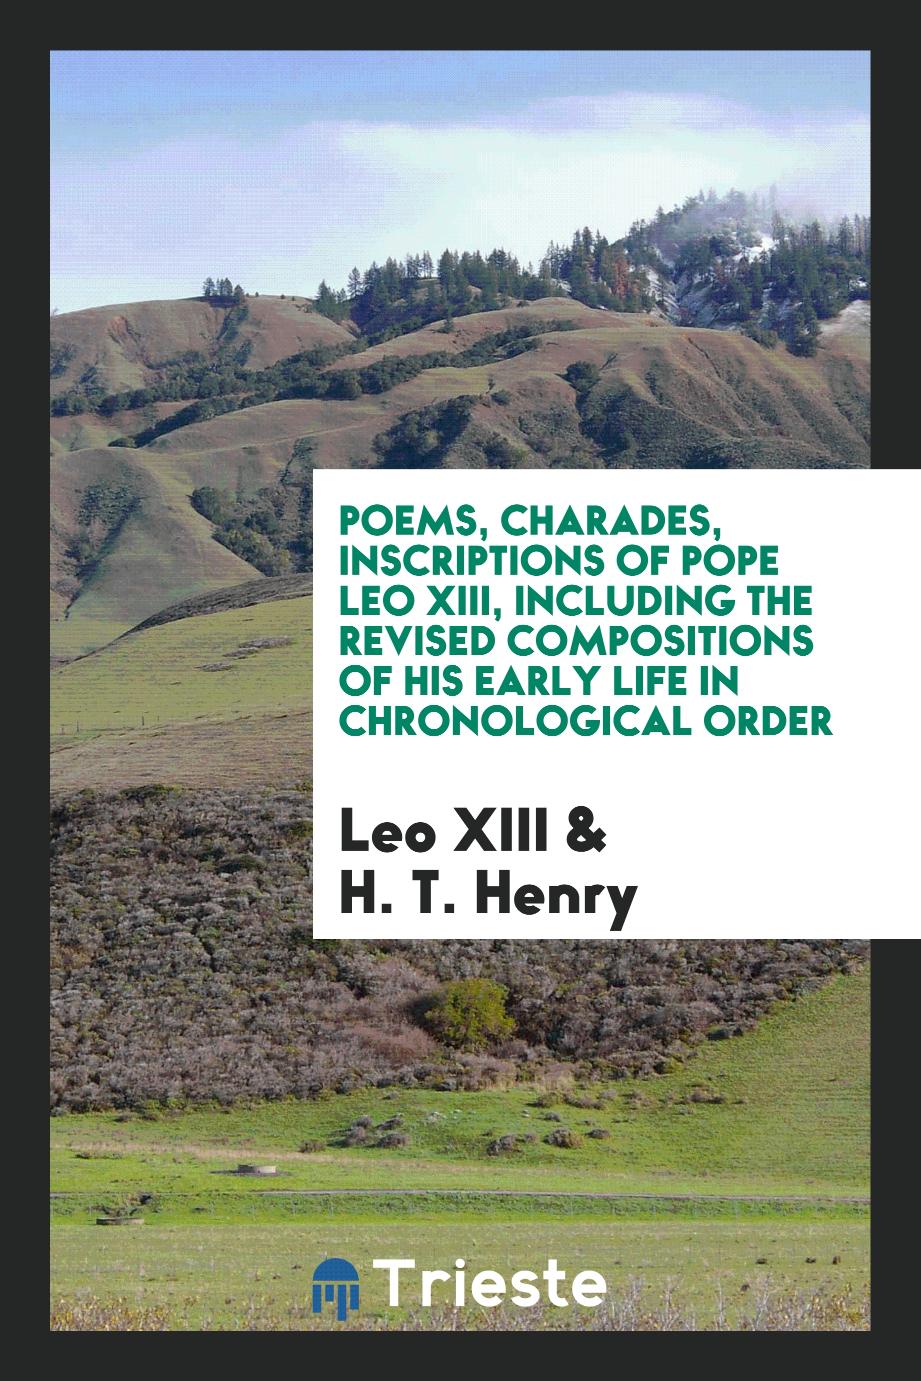 Poems, Charades, Inscriptions of Pope Leo XIII, Including the Revised Compositions of His Early Life in Chronological Order